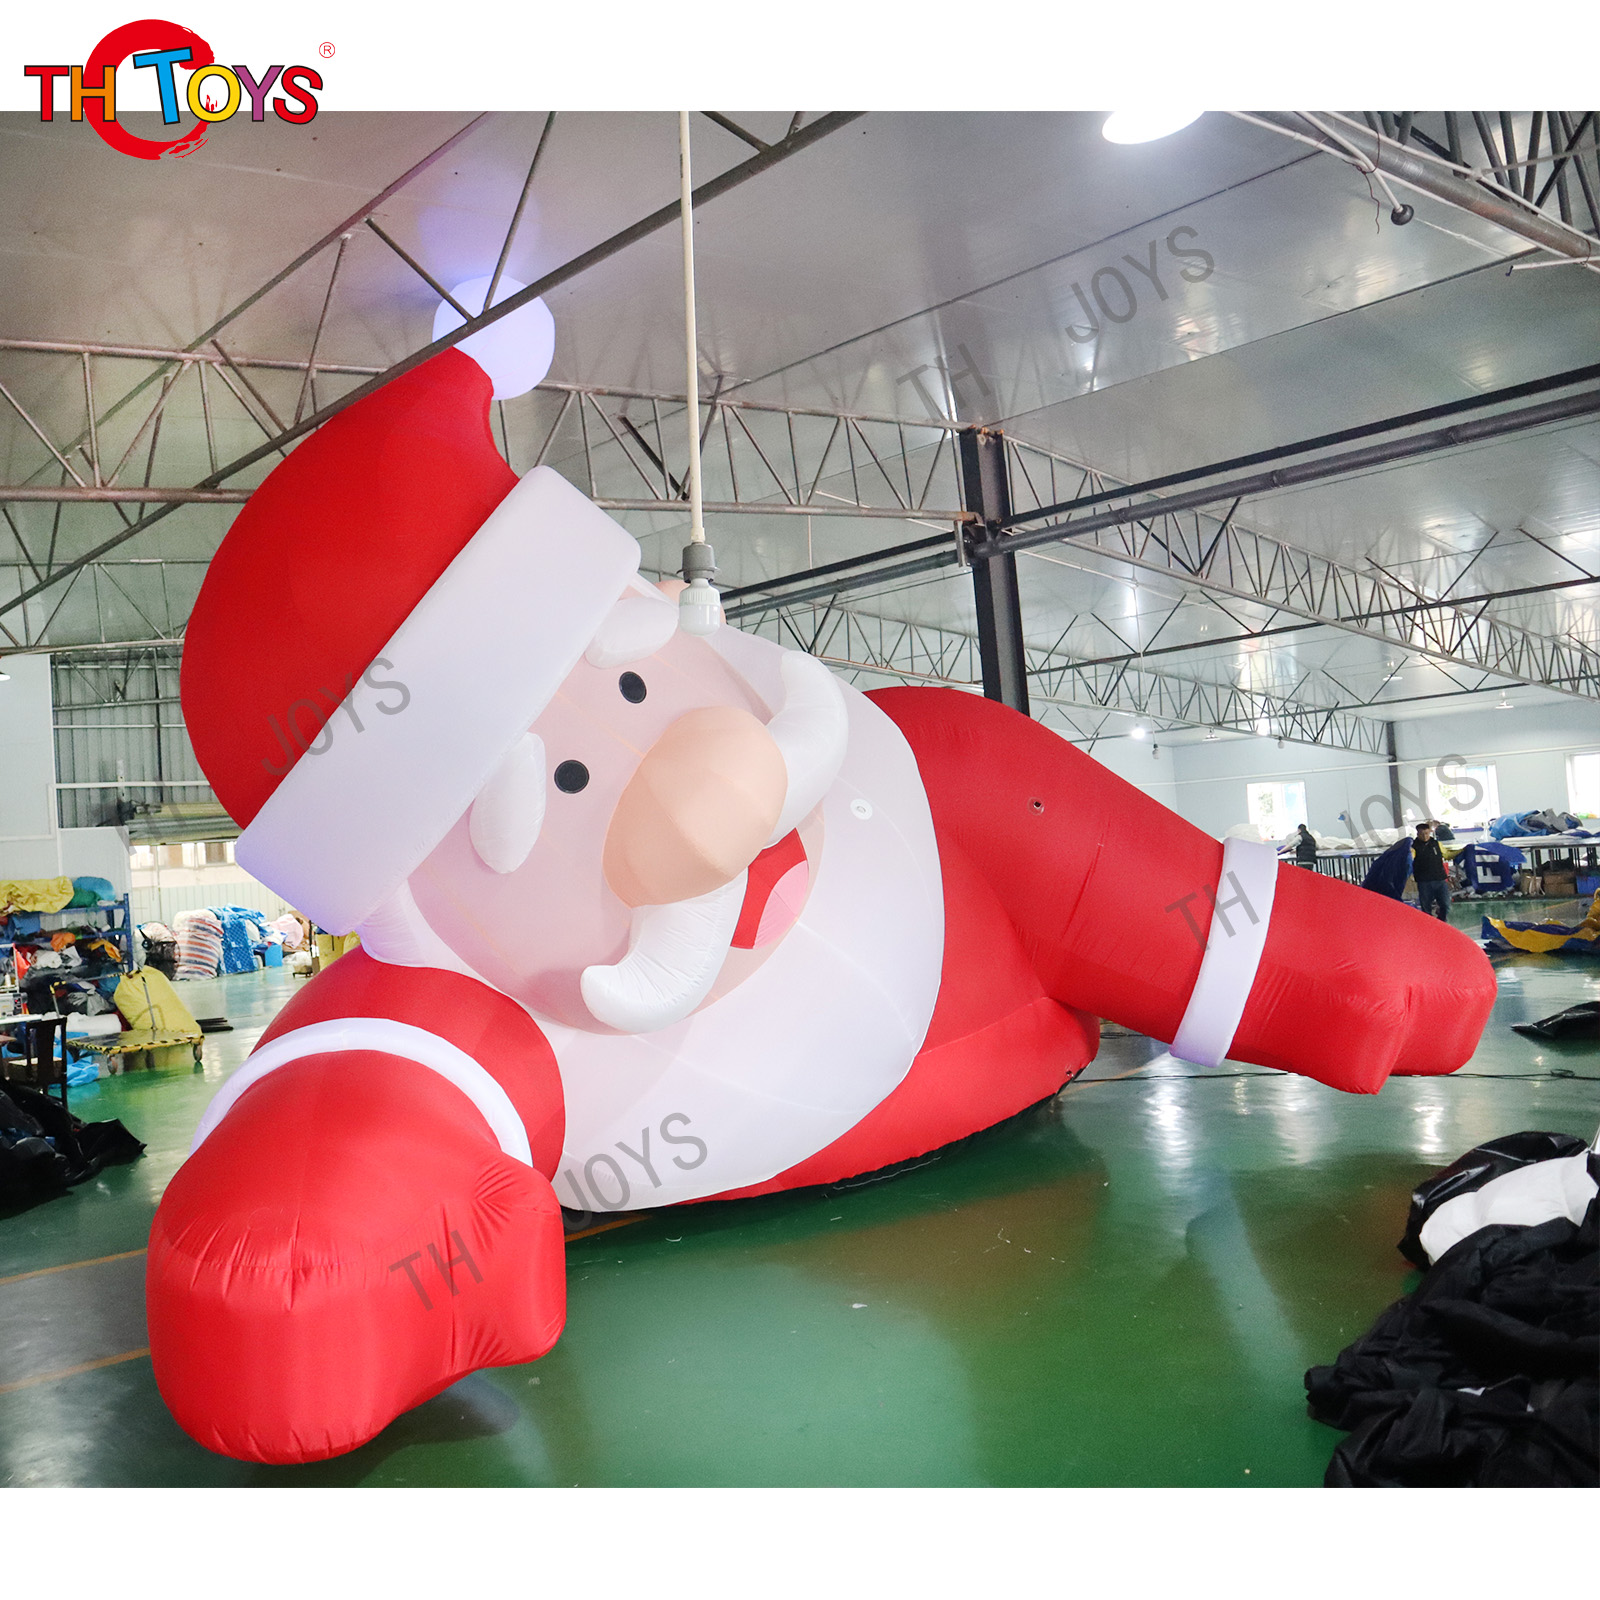 Custom Building Inflatable Climbing Santa With Gifts Mall Lighting Father Santa Claus For Christmas